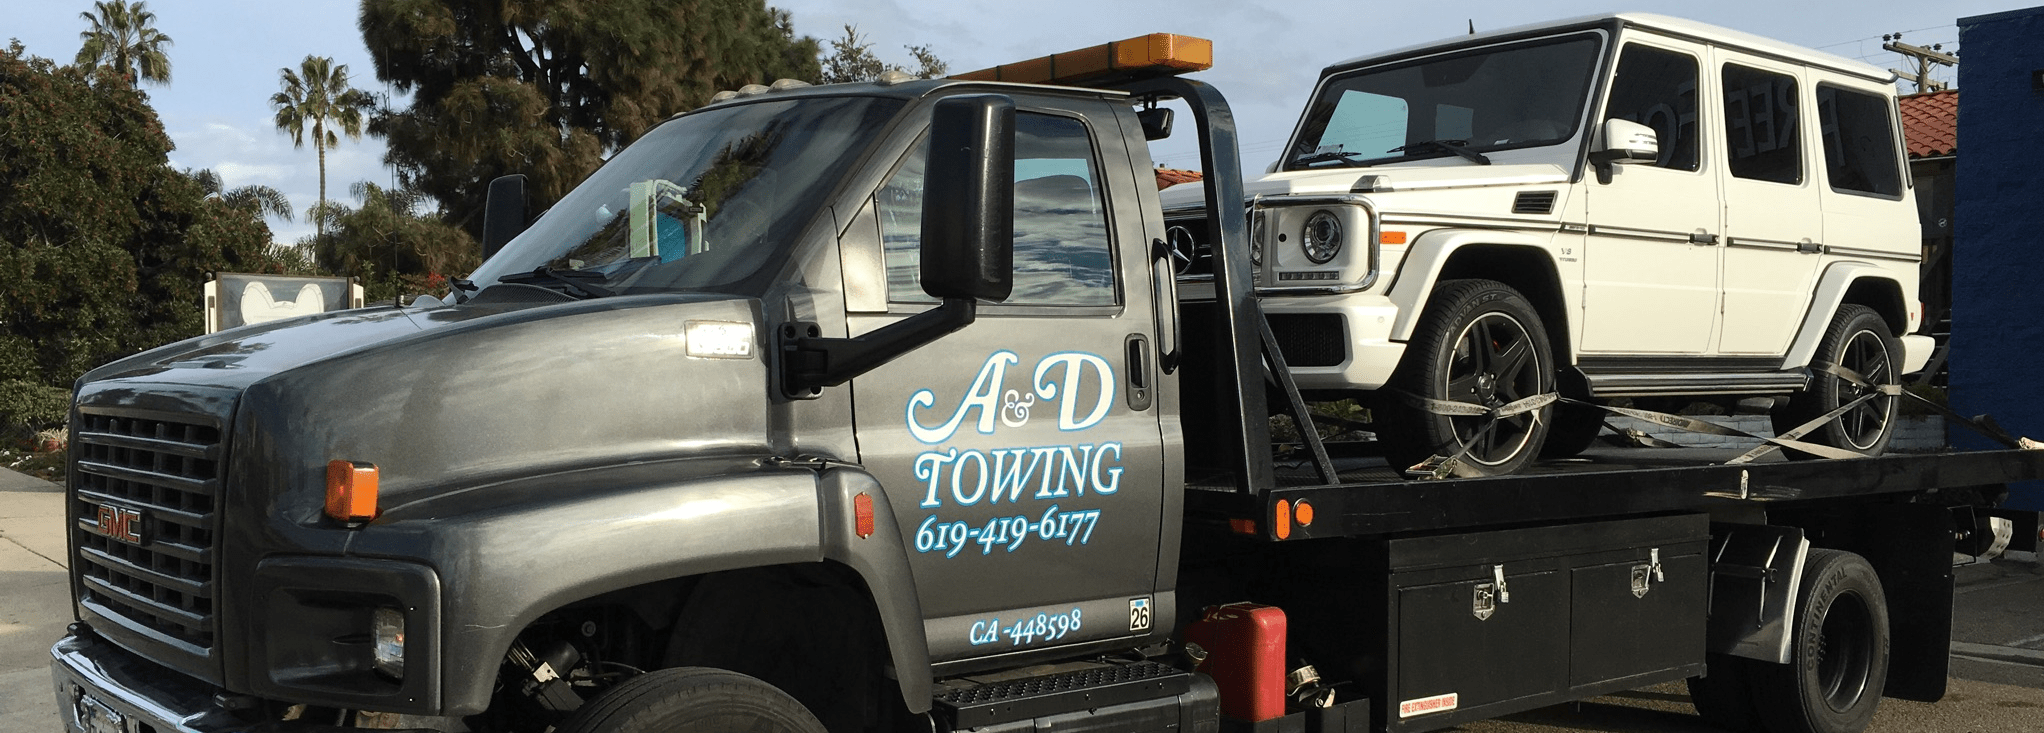 Tow Truck and Roadside Assistance